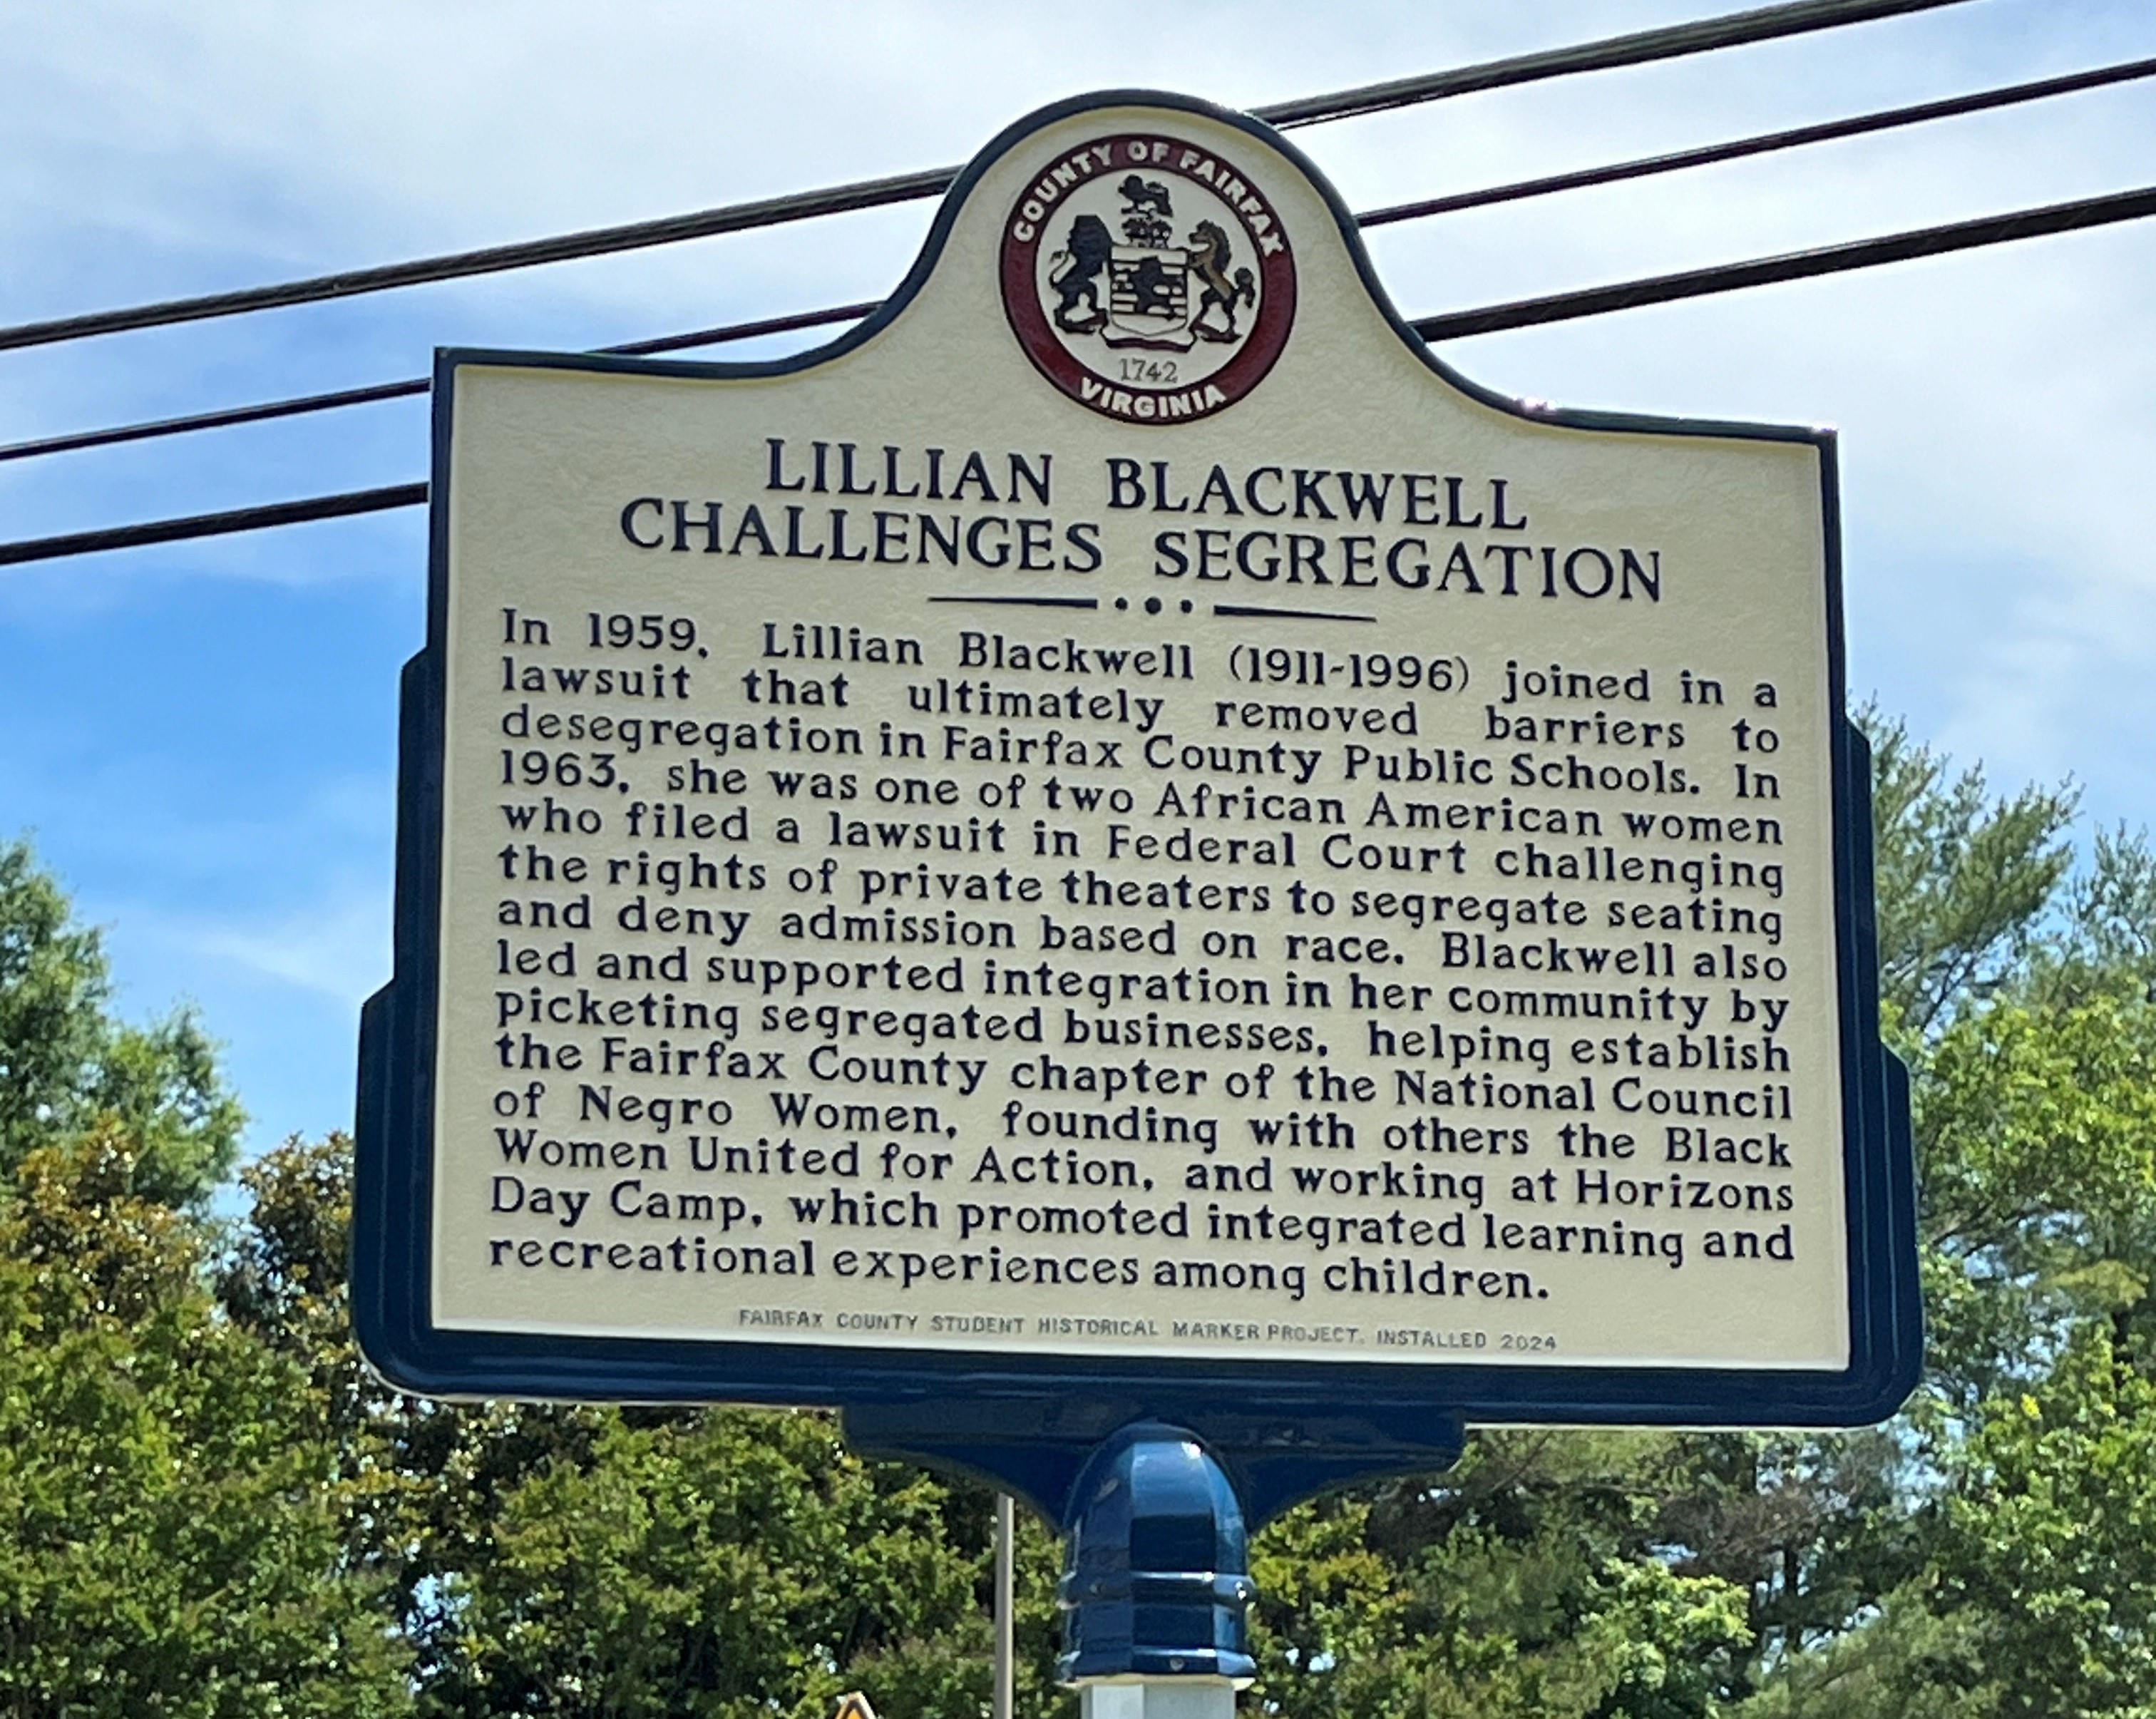 A historical marker on Lillian Blackwell